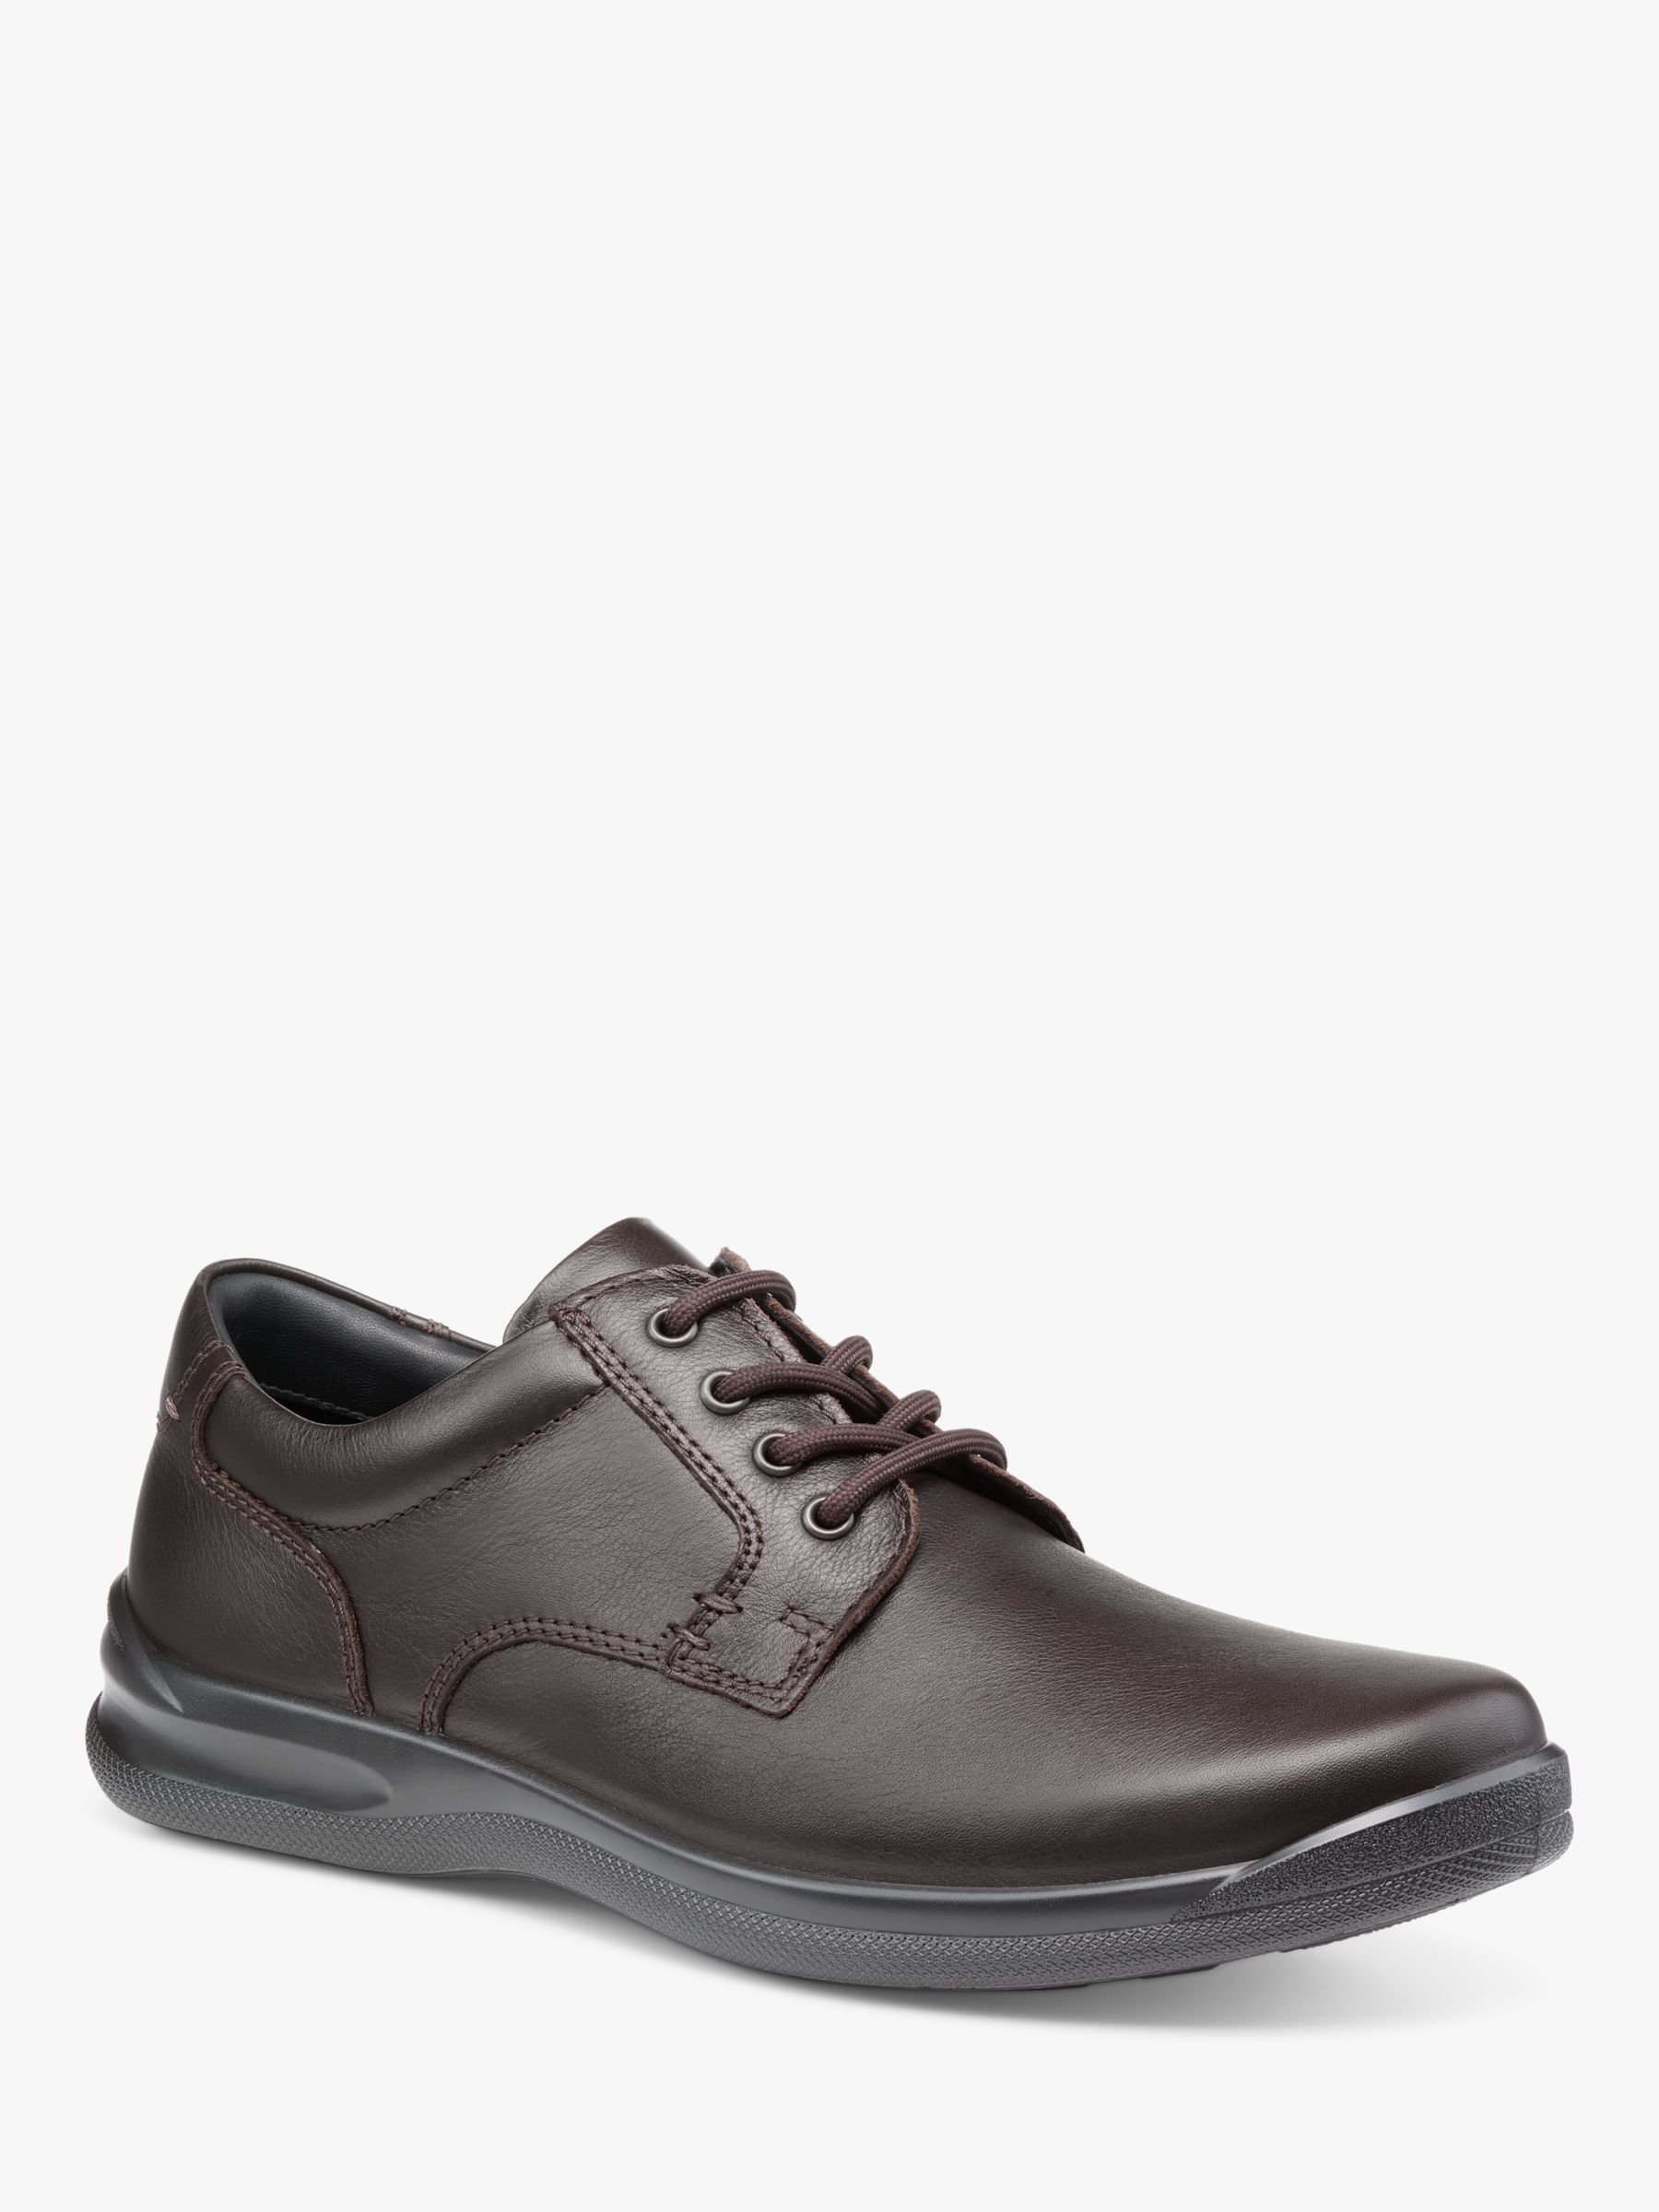 Buy Hotter Burton II Classic Leather Lace-Up Derby Shoes Online at johnlewis.com